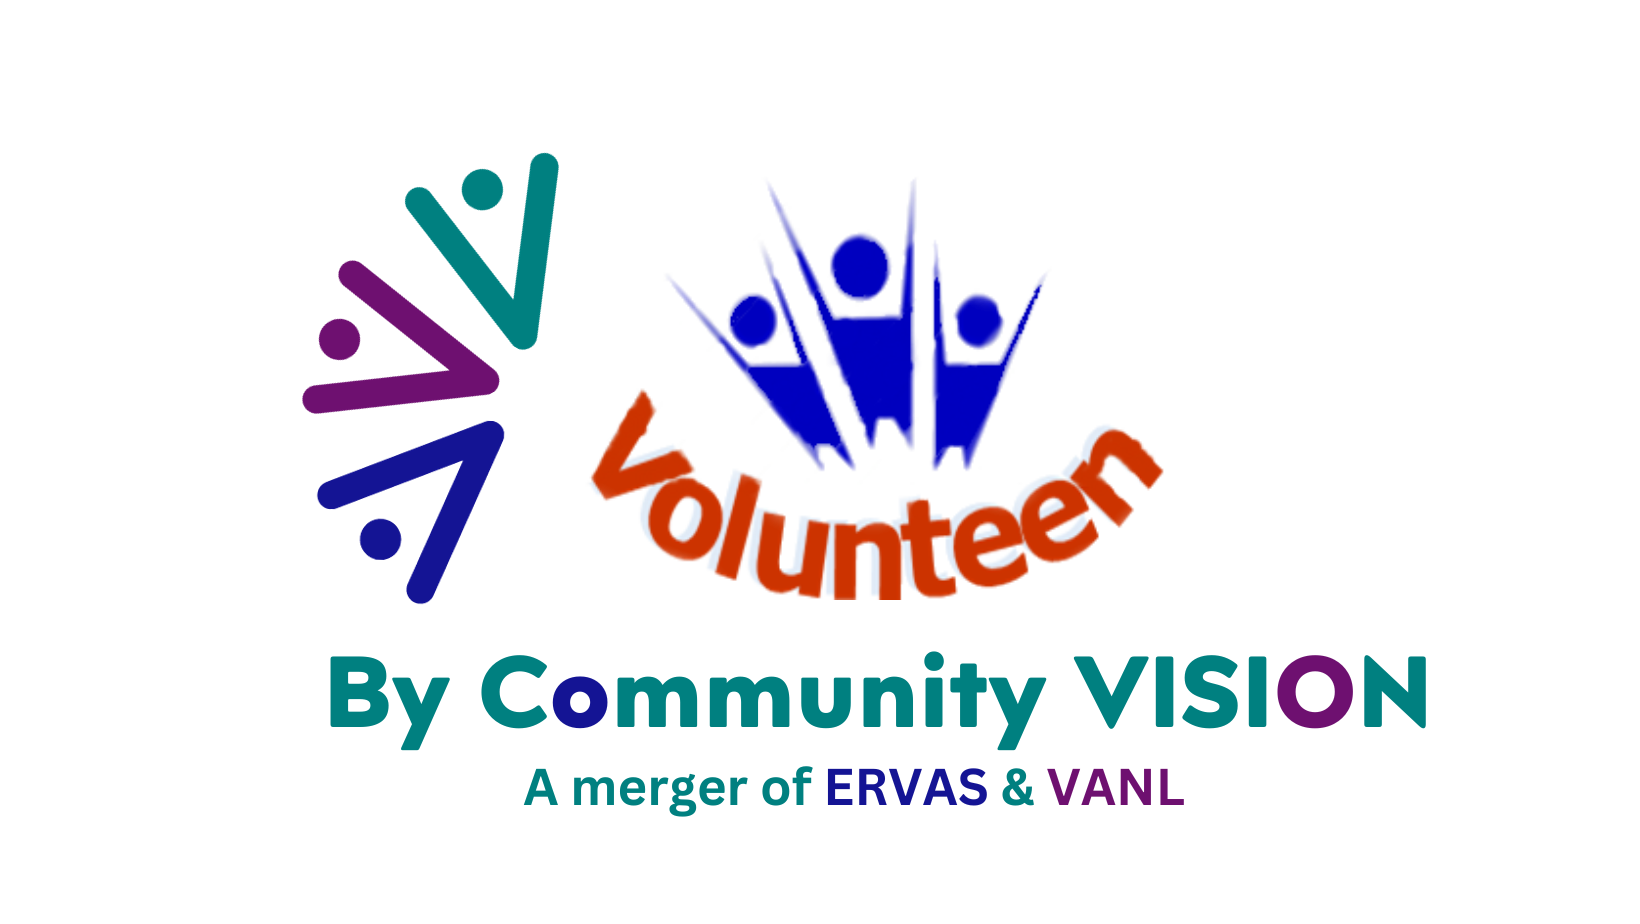 Volunteen Voice by Community VISION